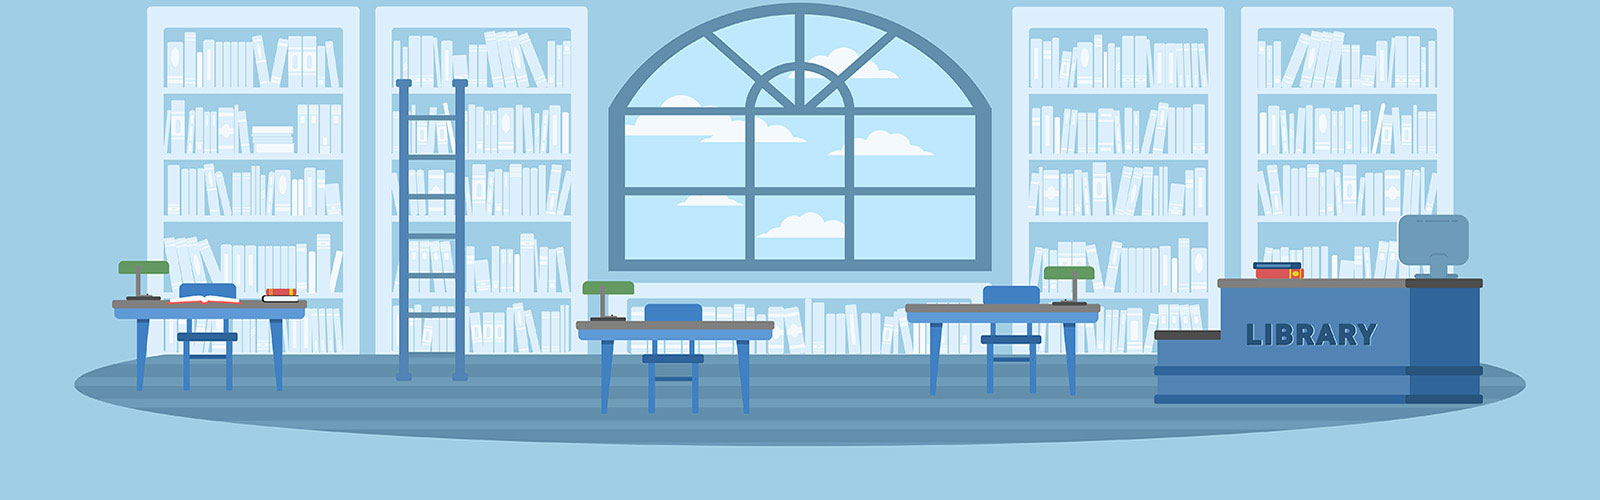 An illustrated graphic of a library